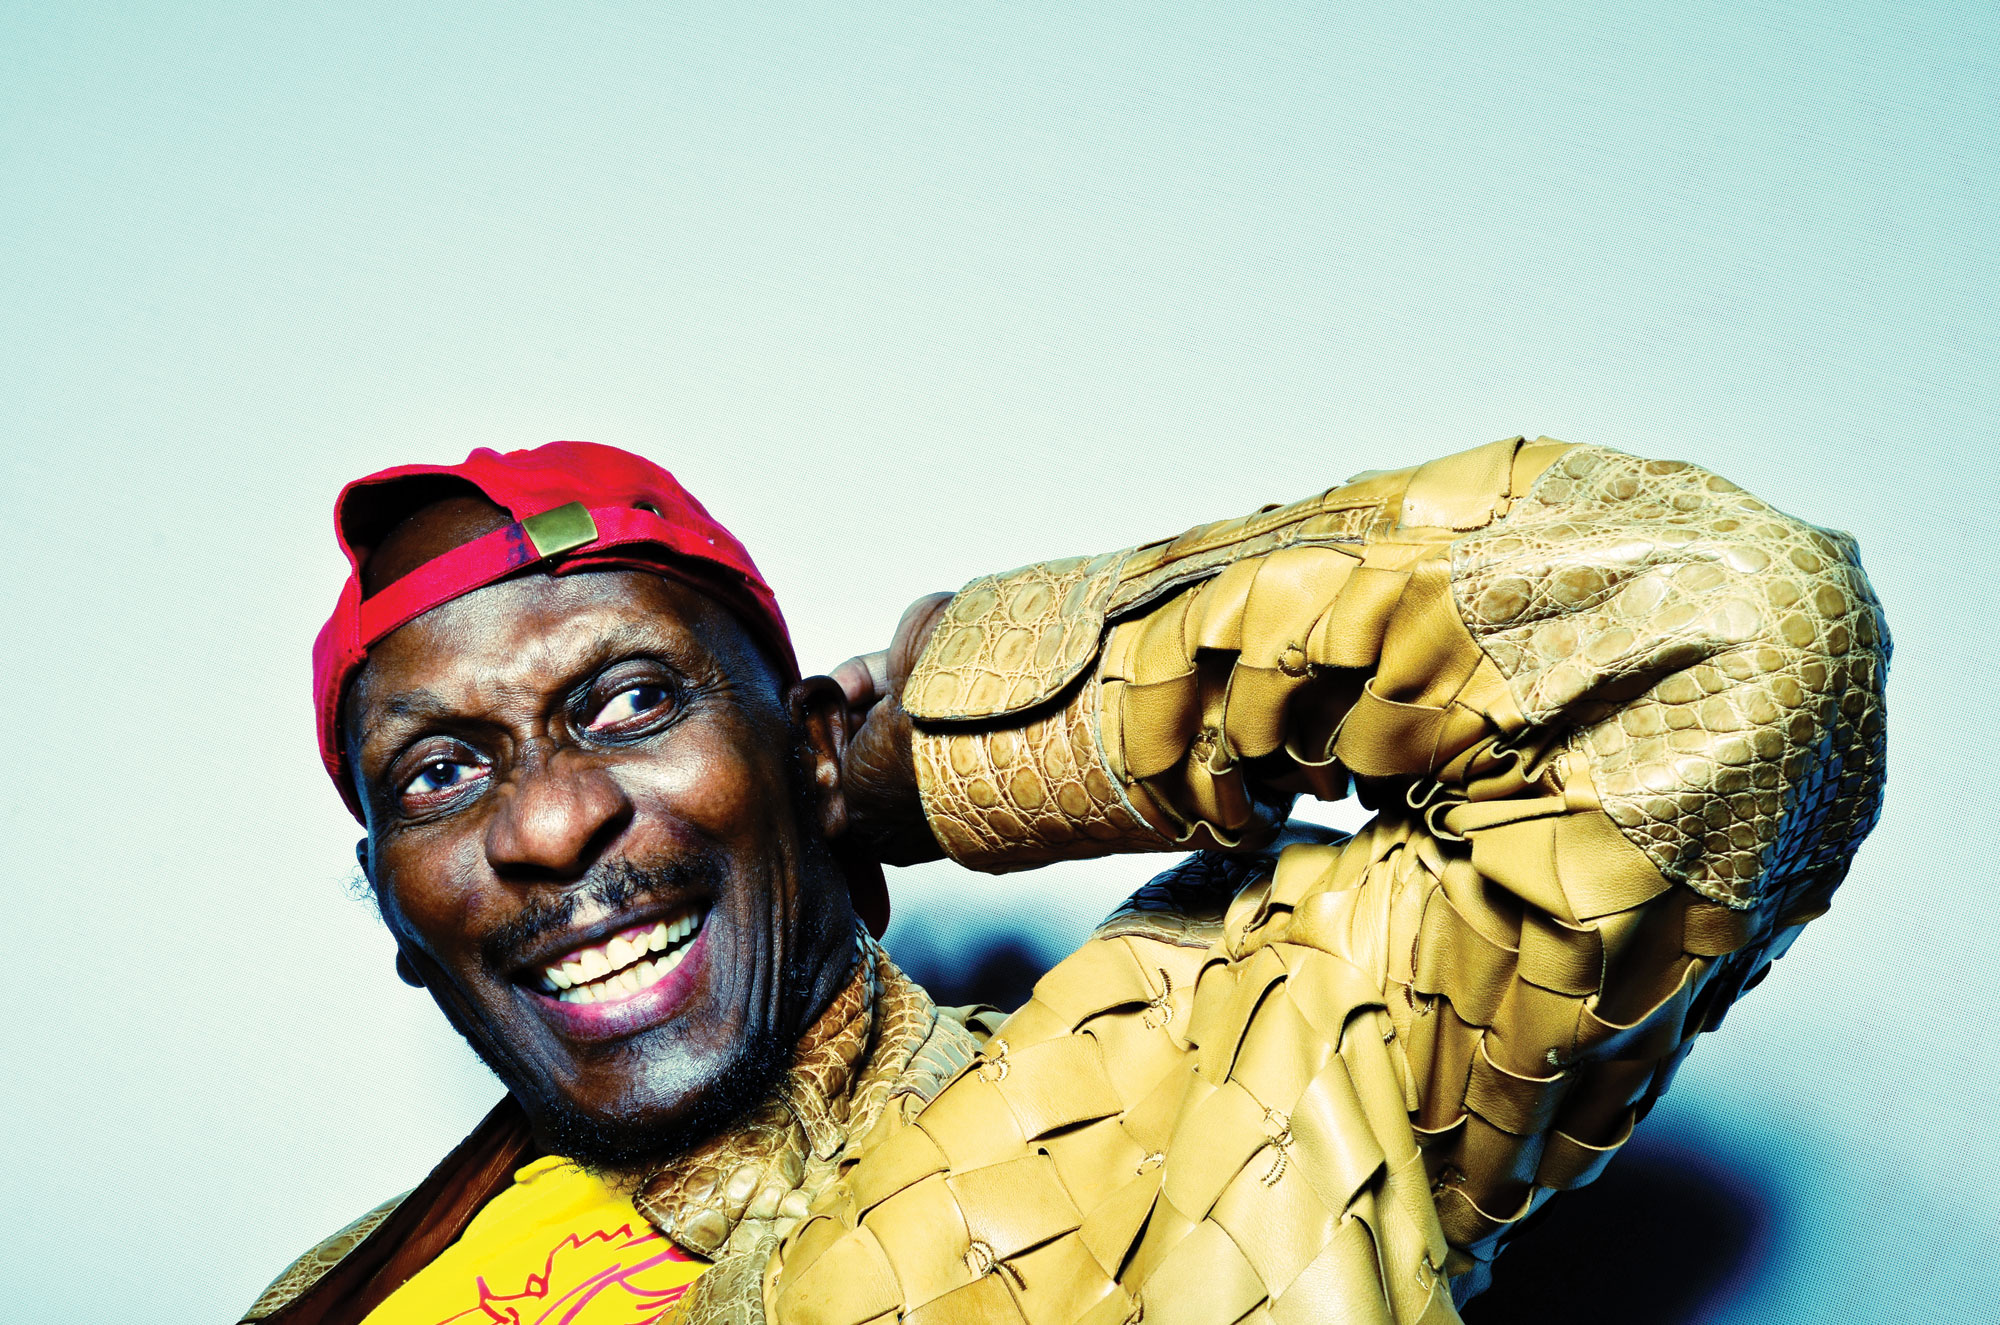 Jimmy cliff. Jimmy Cliff – Cliff Hanger. Селфи на Ямайке. Jimmy Cliff with Family.